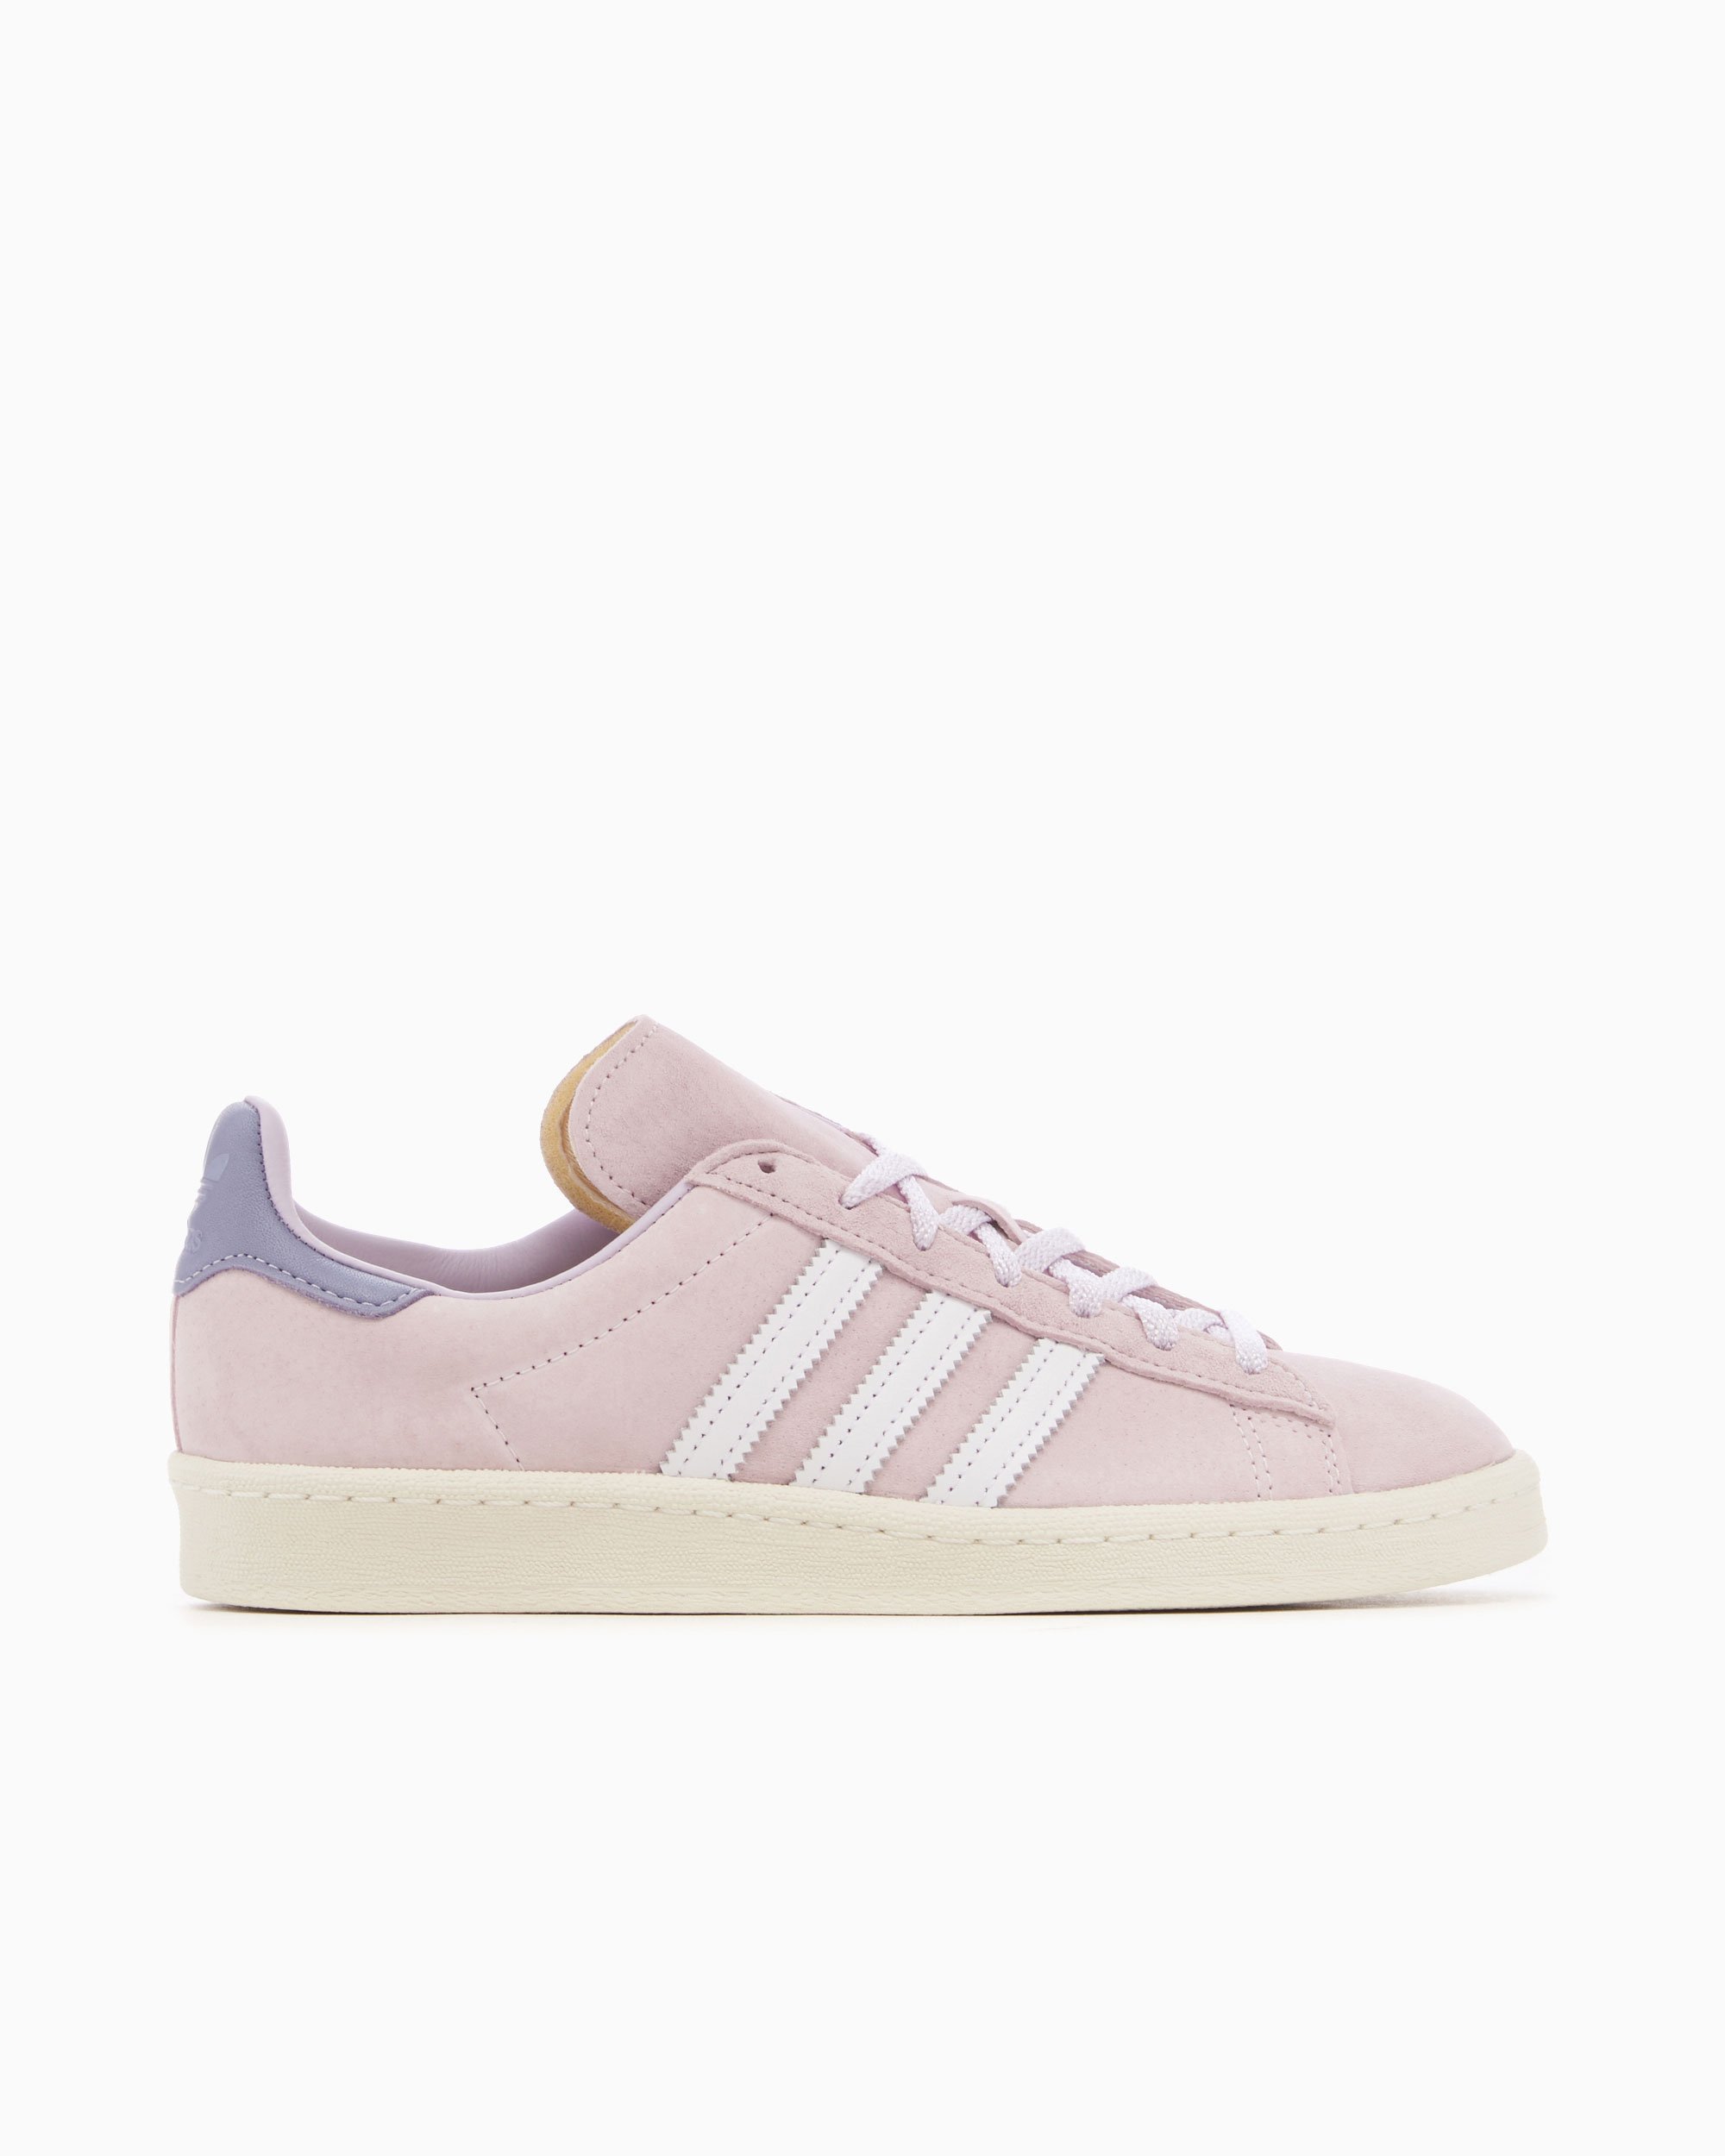 Adidas Campus 80s - Women's & Men's Sneakers | Limited Resell